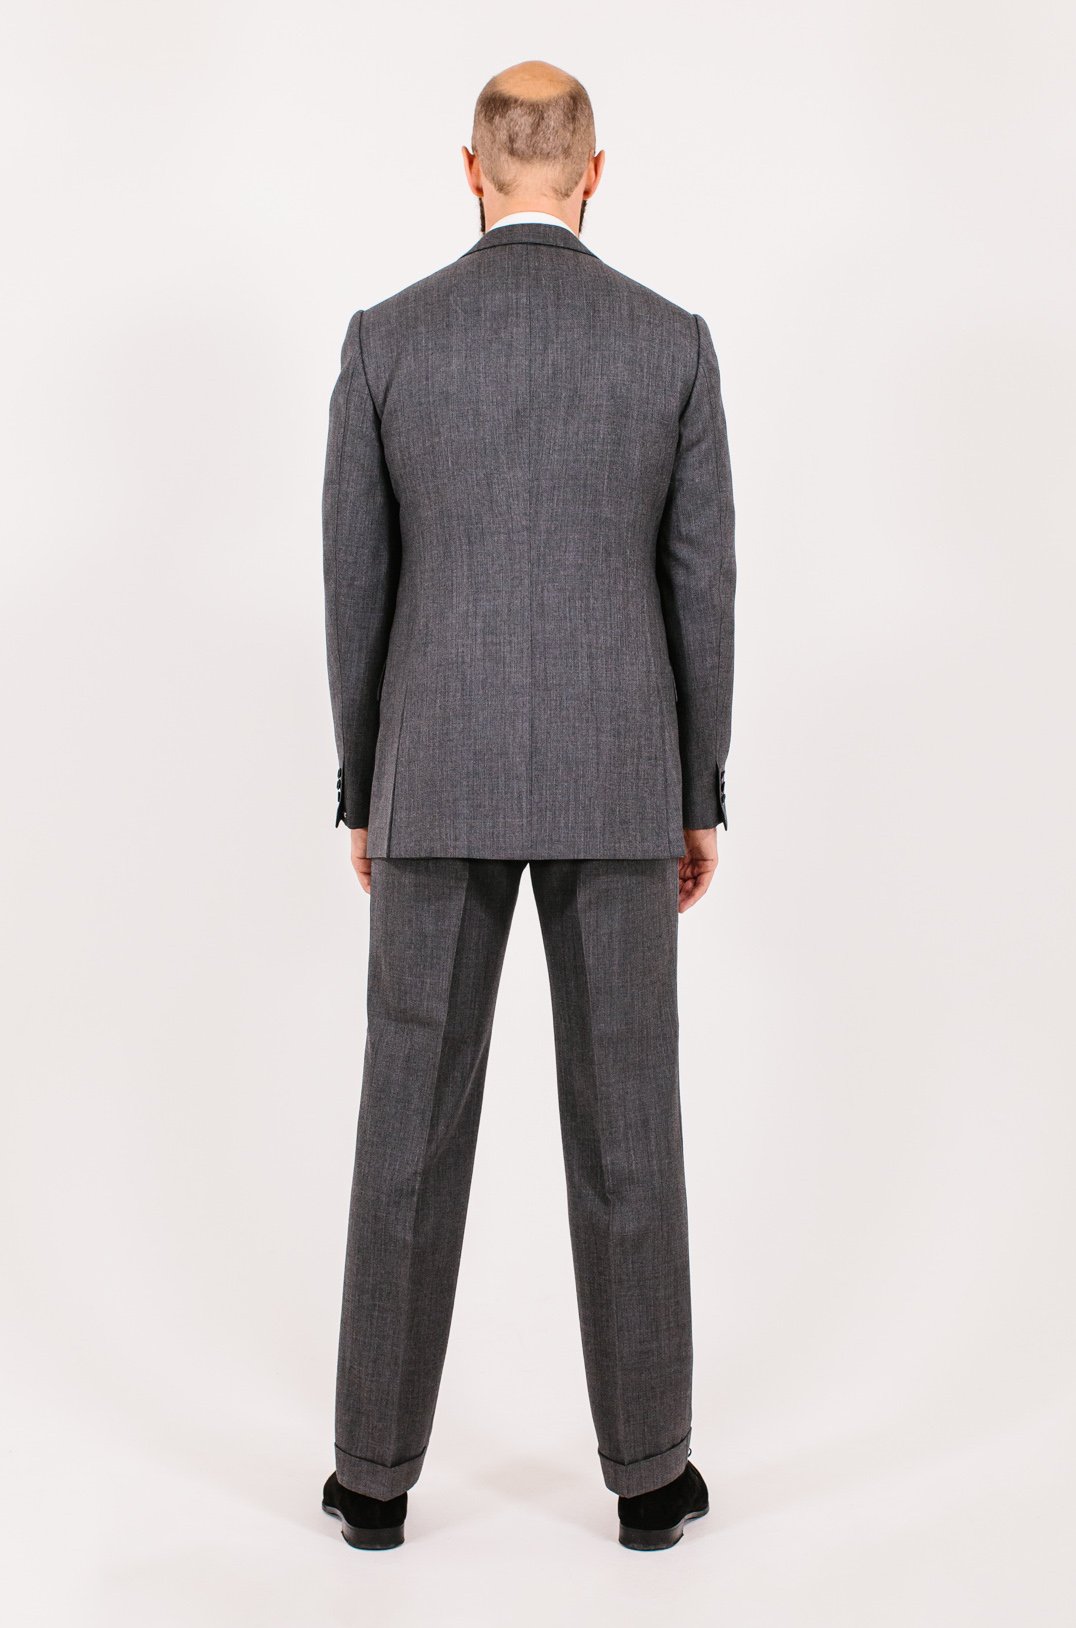 Camps de Luca pick-and-pick suit: Style Breakdown – Permanent Style